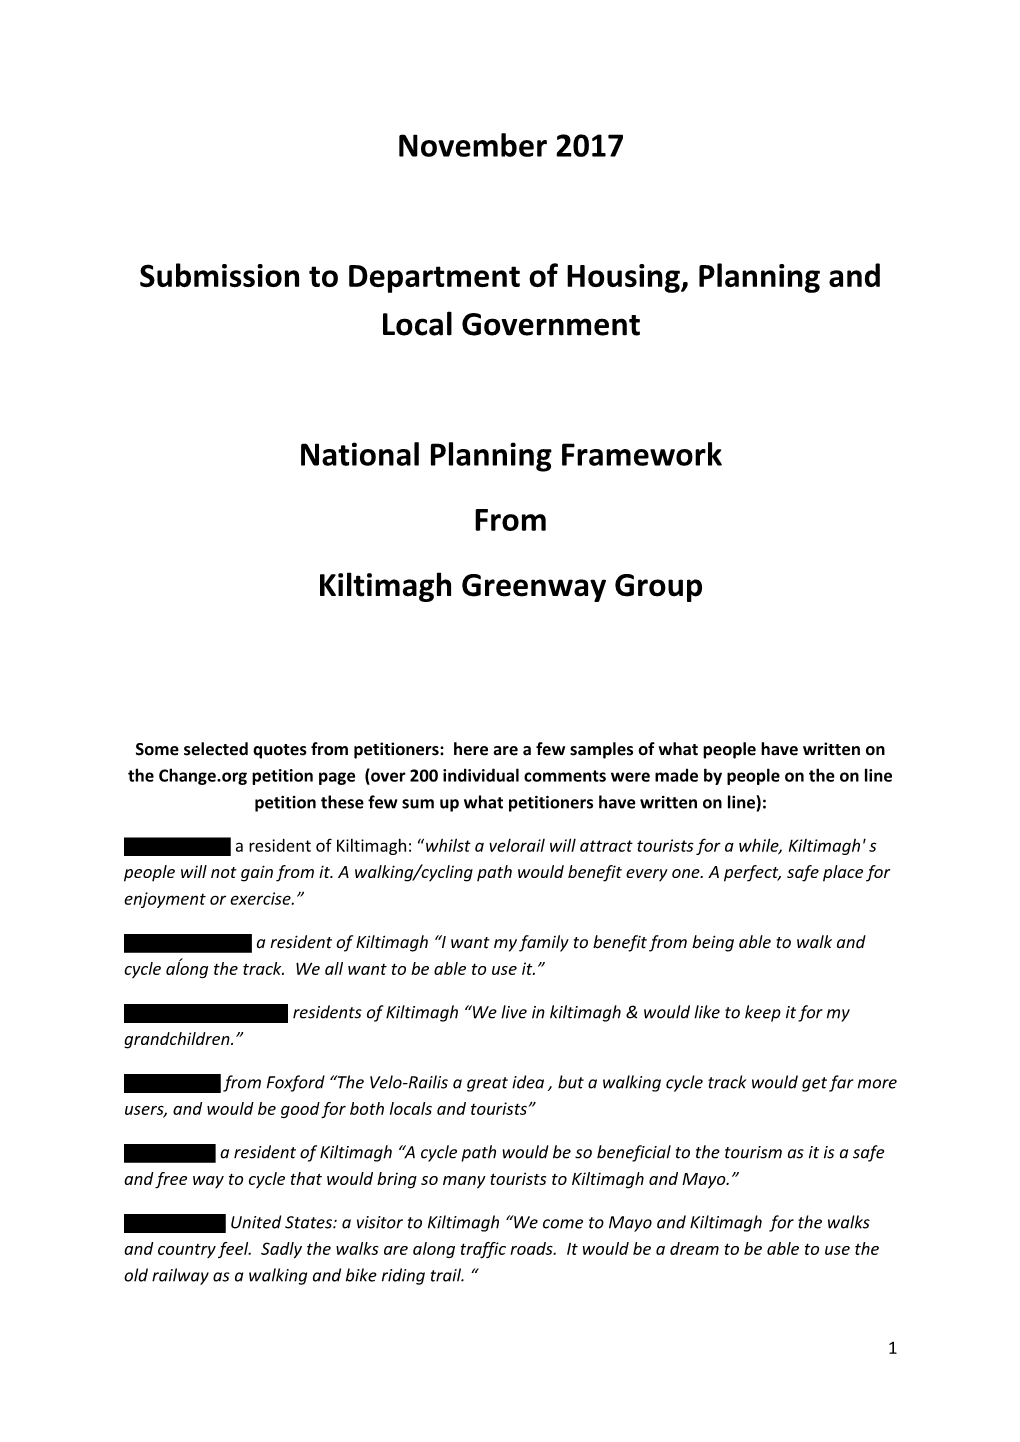 November 2017 Submission to Department of Housing, Planning